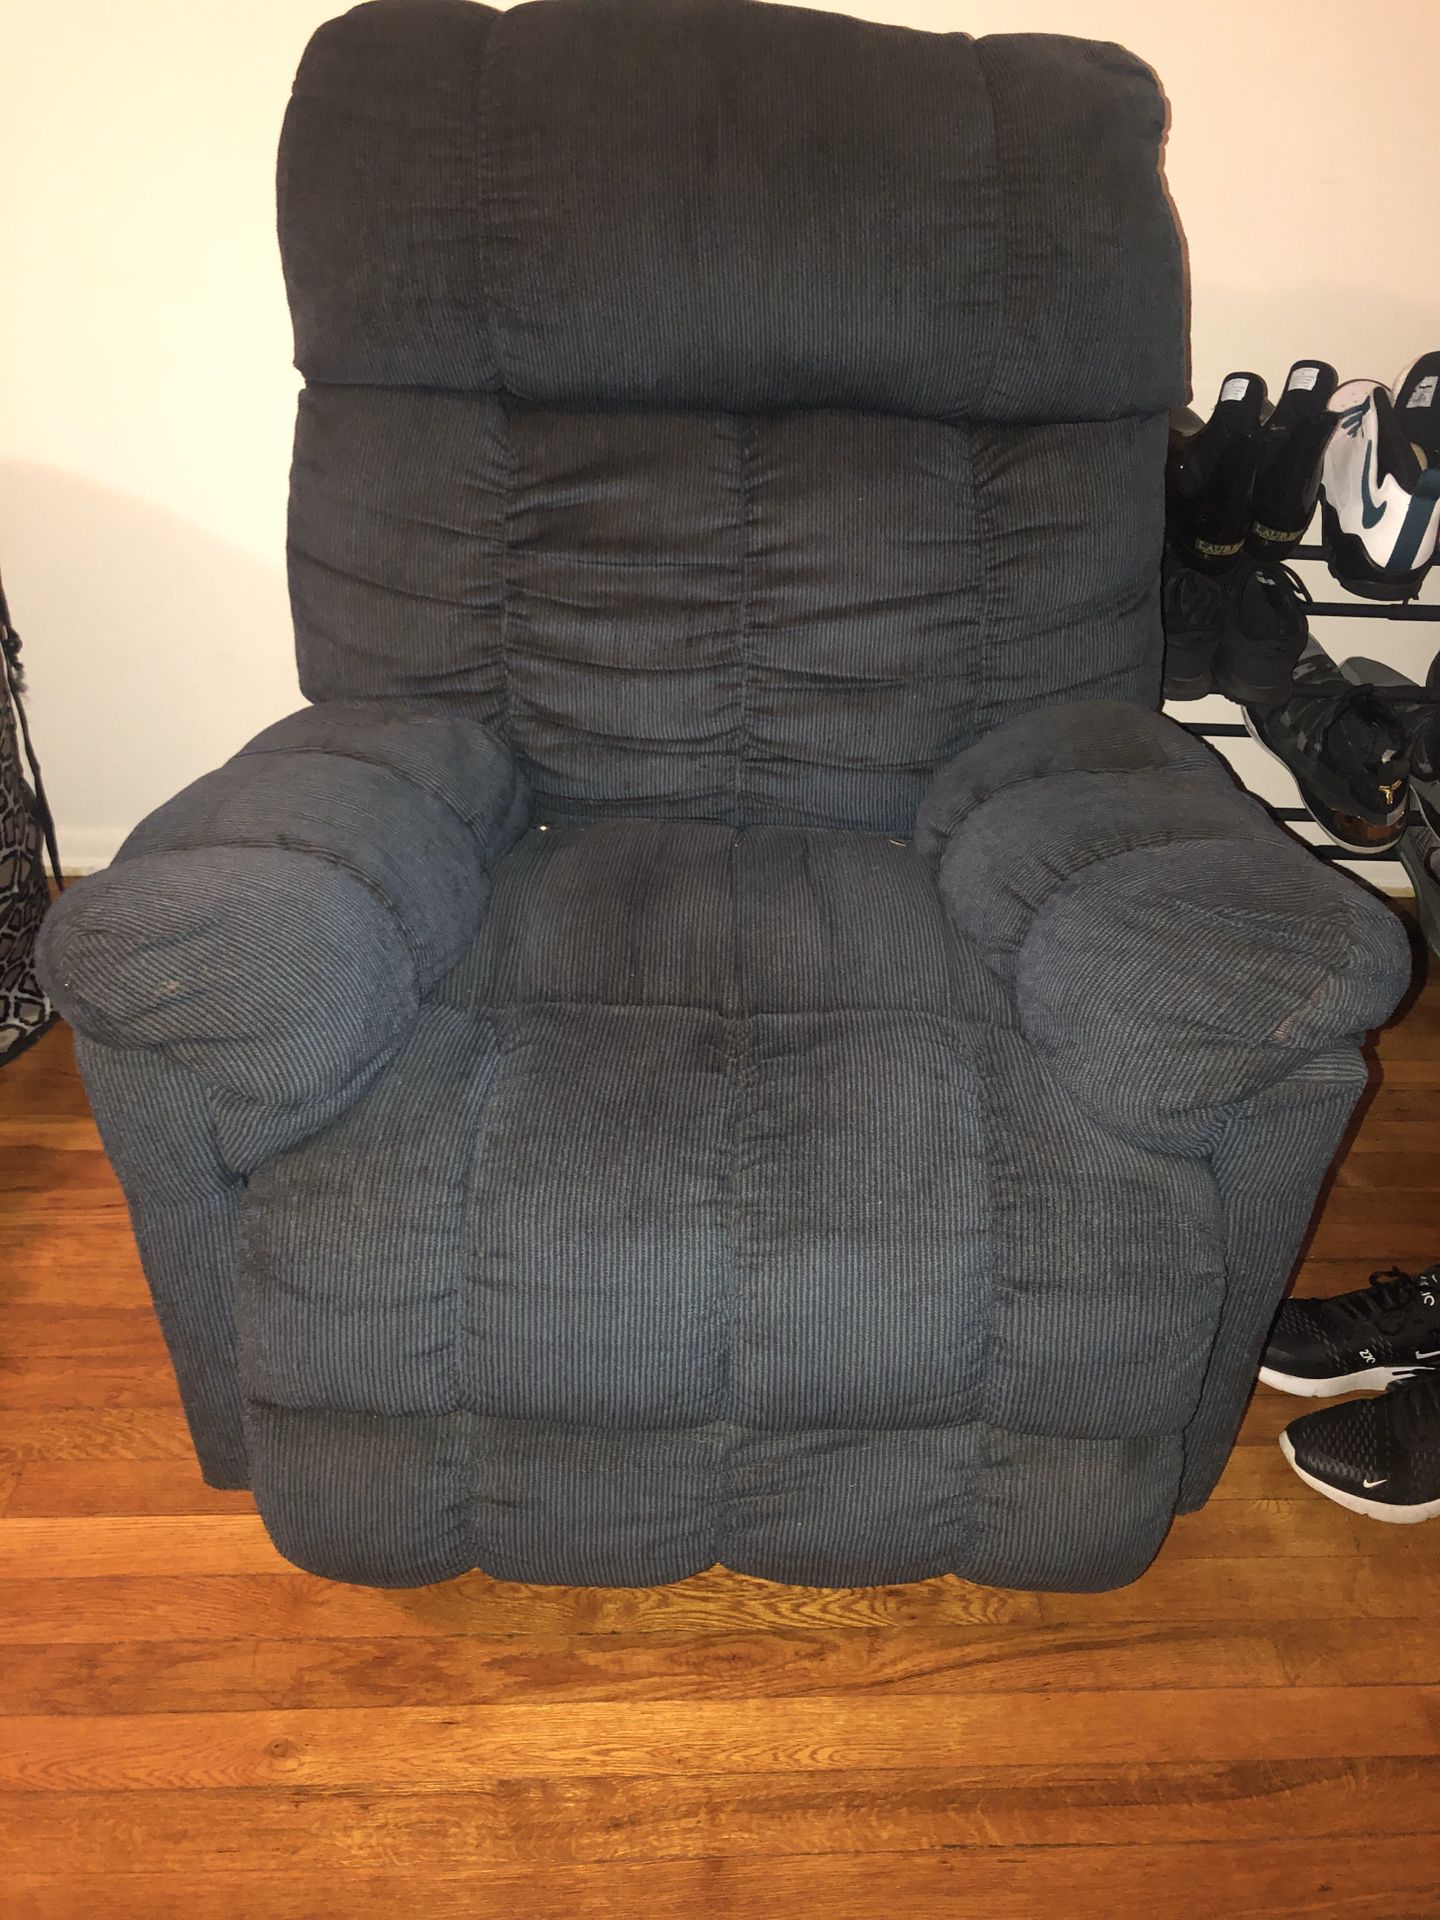 Recliner that barely reclines. Just need it out the house.